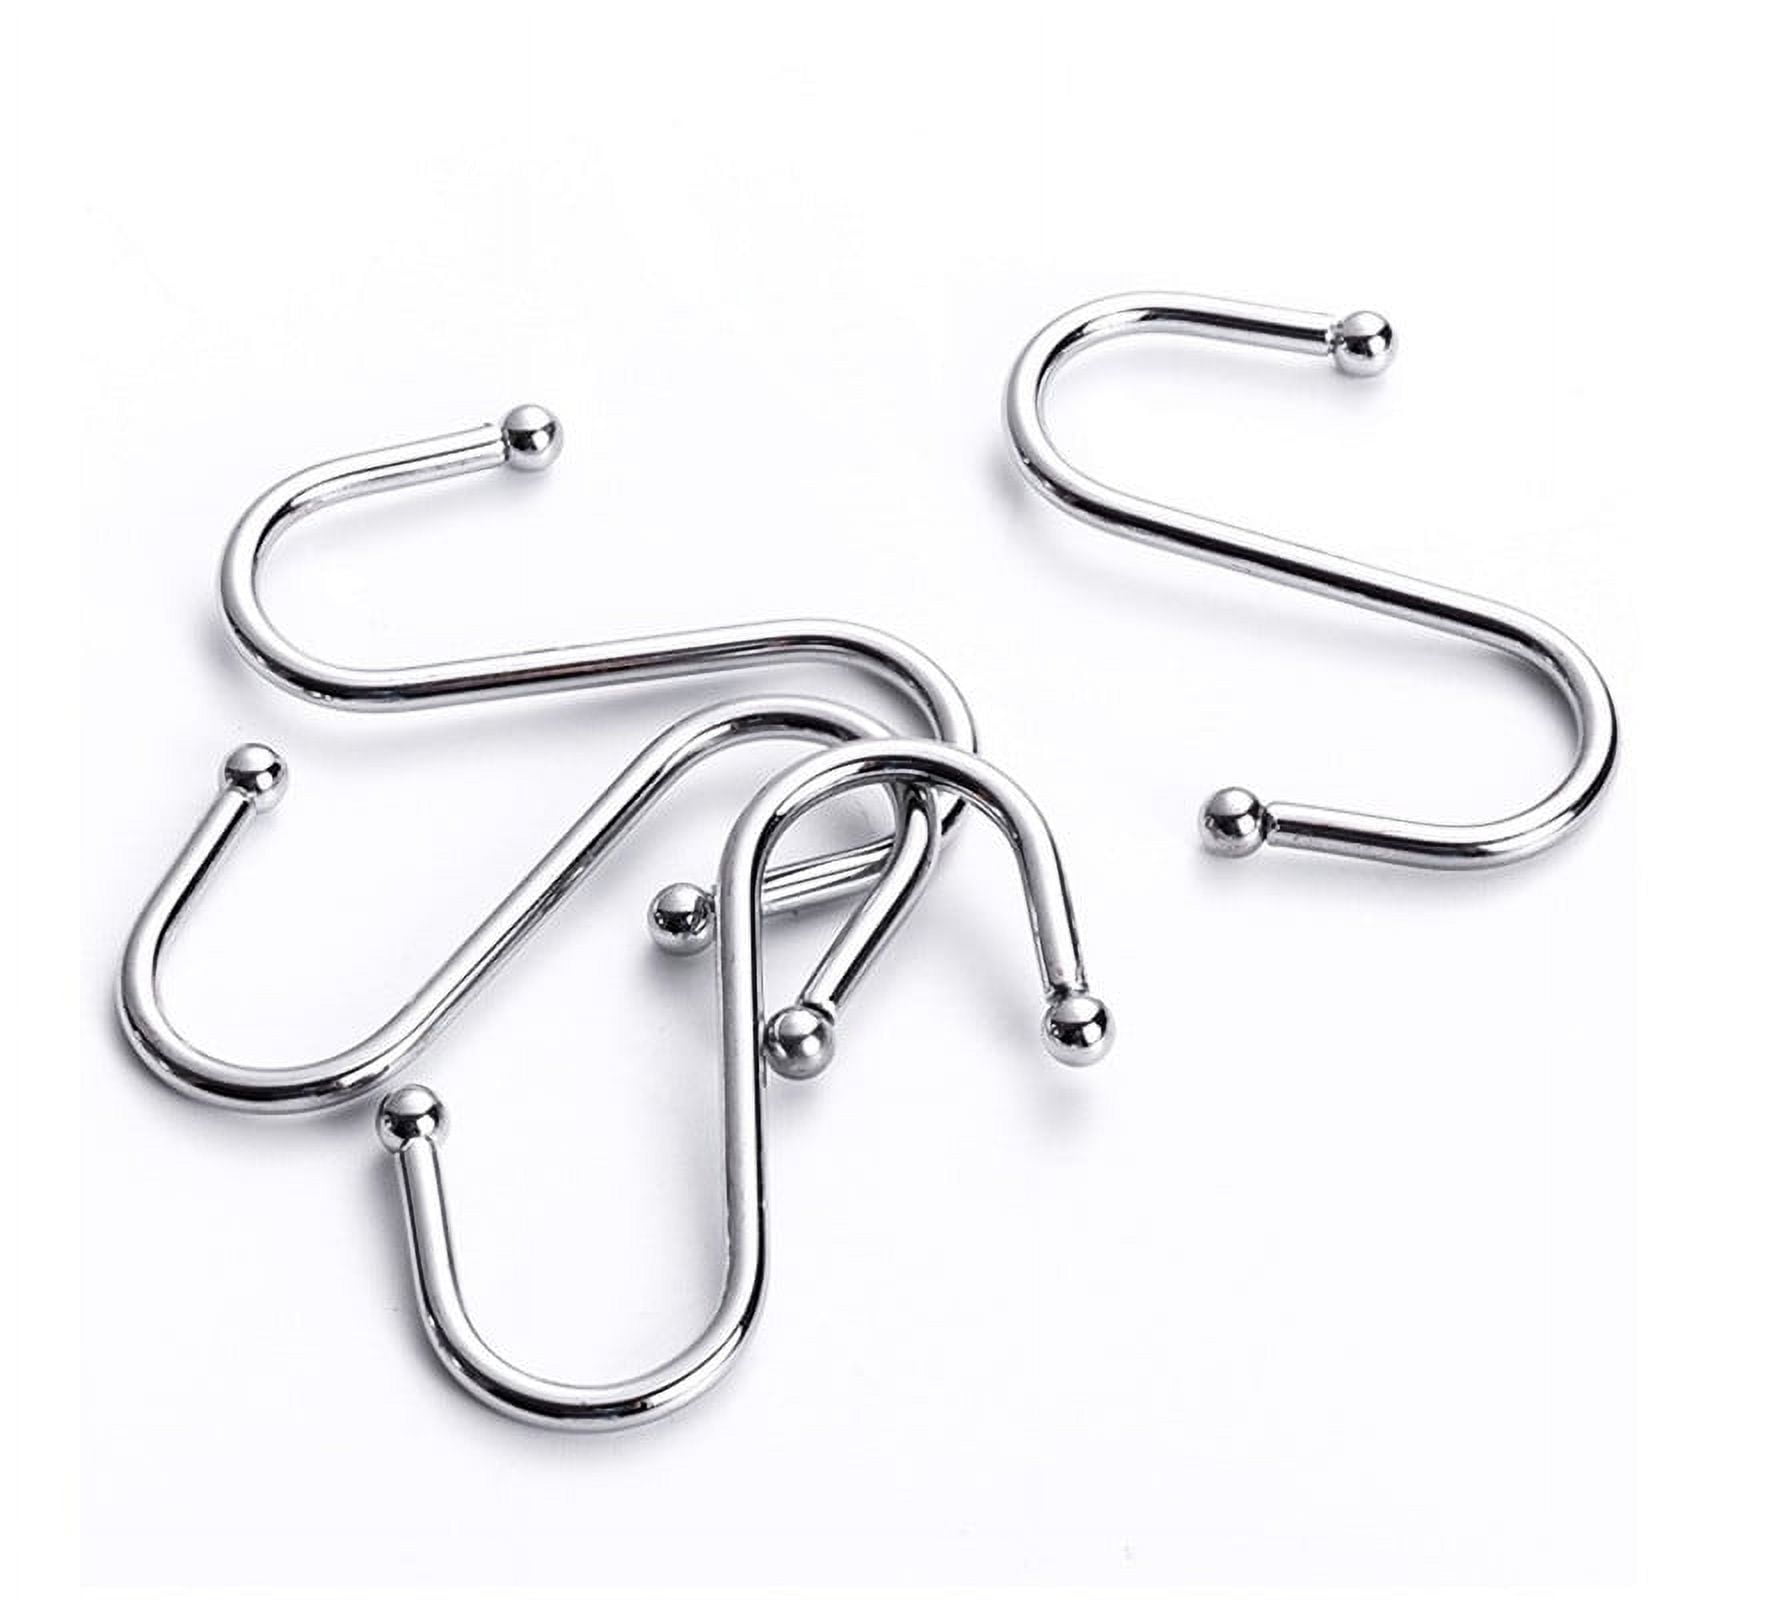 Happon 6 Pack S Hooks 3.15 Inch Silver, Heavy Duty Metal S Shaped Hook, S  Hook for Hanging Items, Suitable for Garage, Office Garden, Kitchen